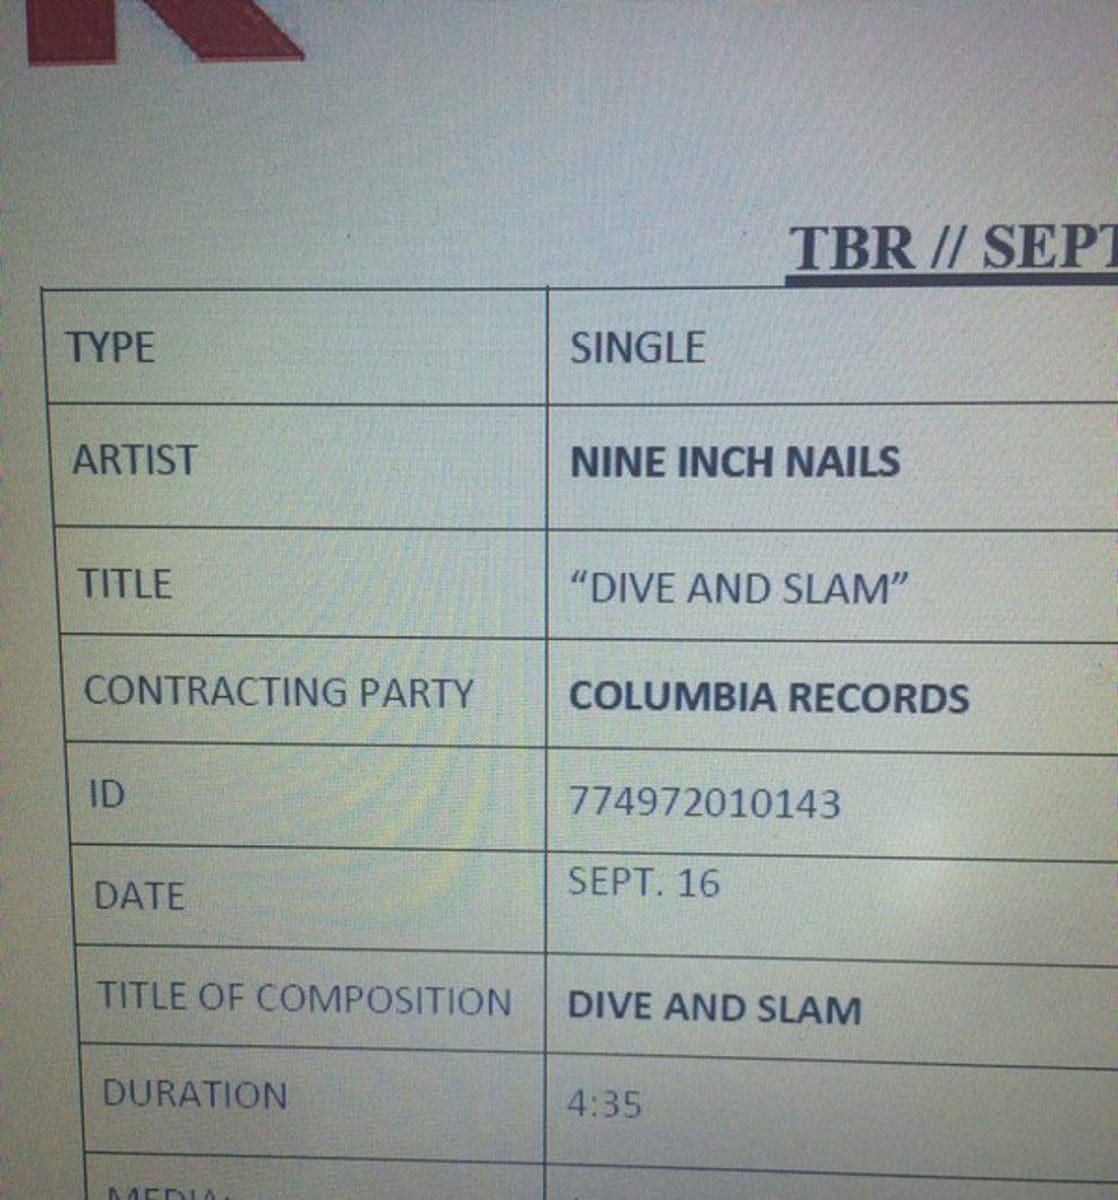 New Nine Inch Nails (promo) single expected in September (if Discog is correct that is)